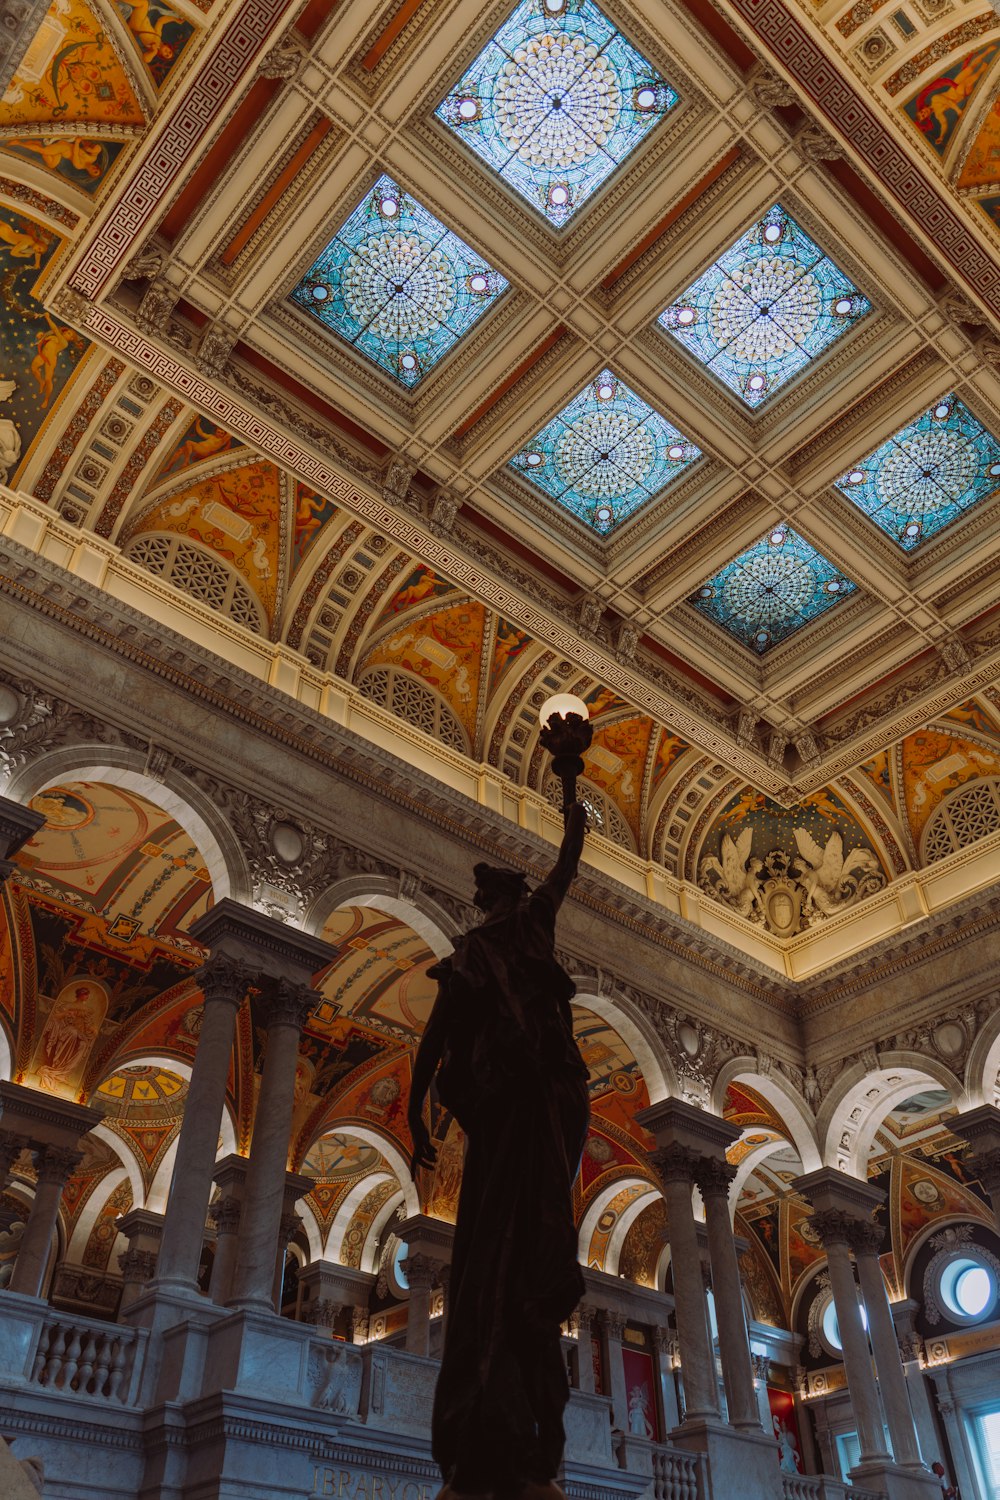 a statue in a building with a glass ceiling